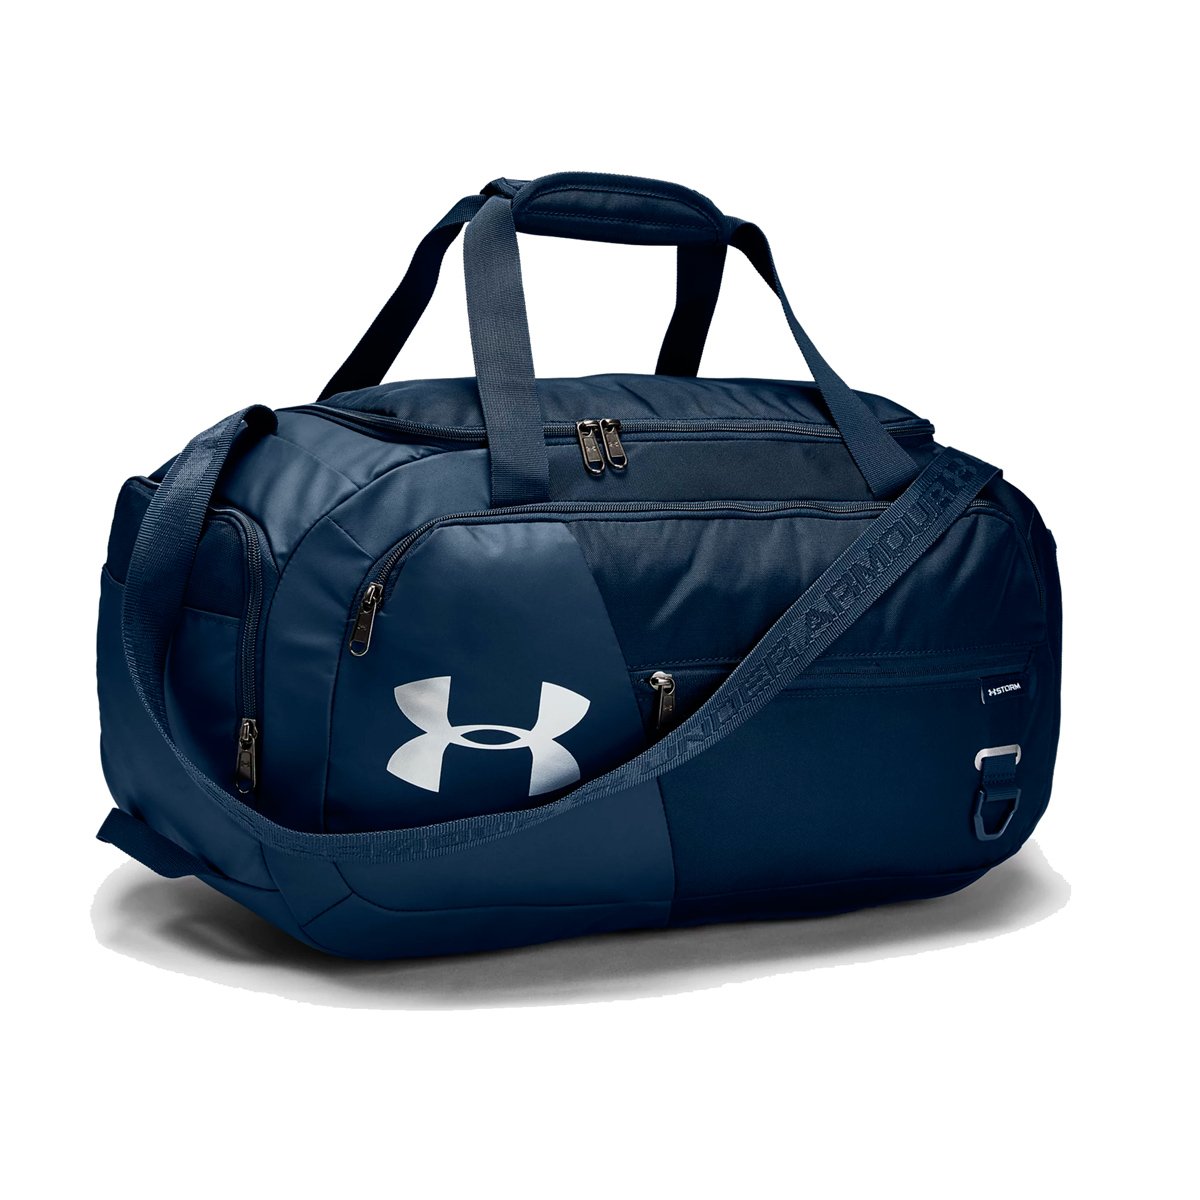 Under Armour Undeniable 4.0 Duffle Bag - Small thumbnail